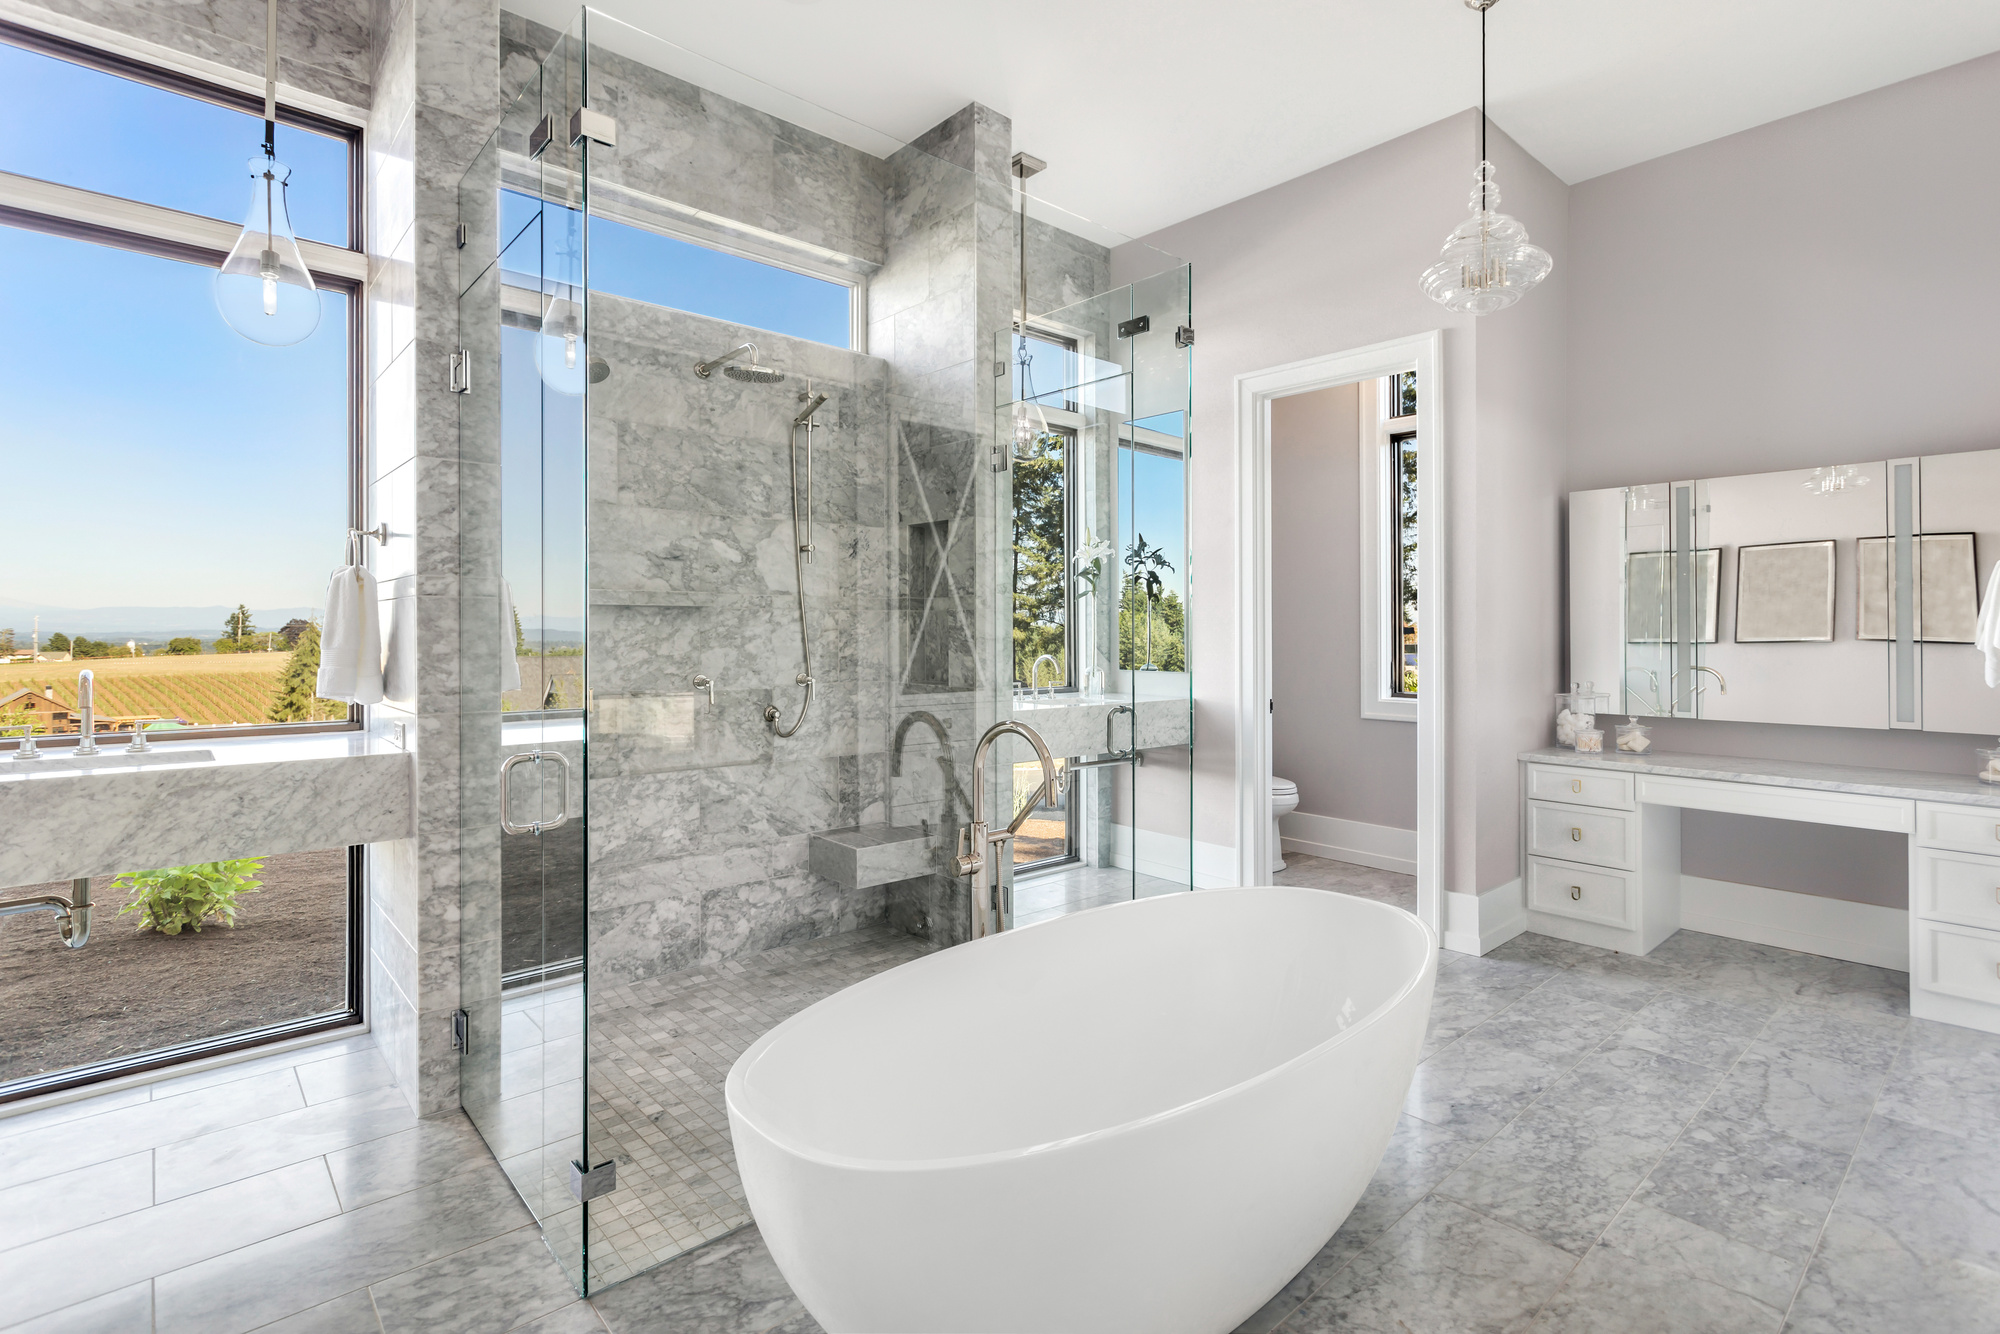 modern master bathroom interior in new luxury home with glass shower doors, and luxurious soakingbathtub